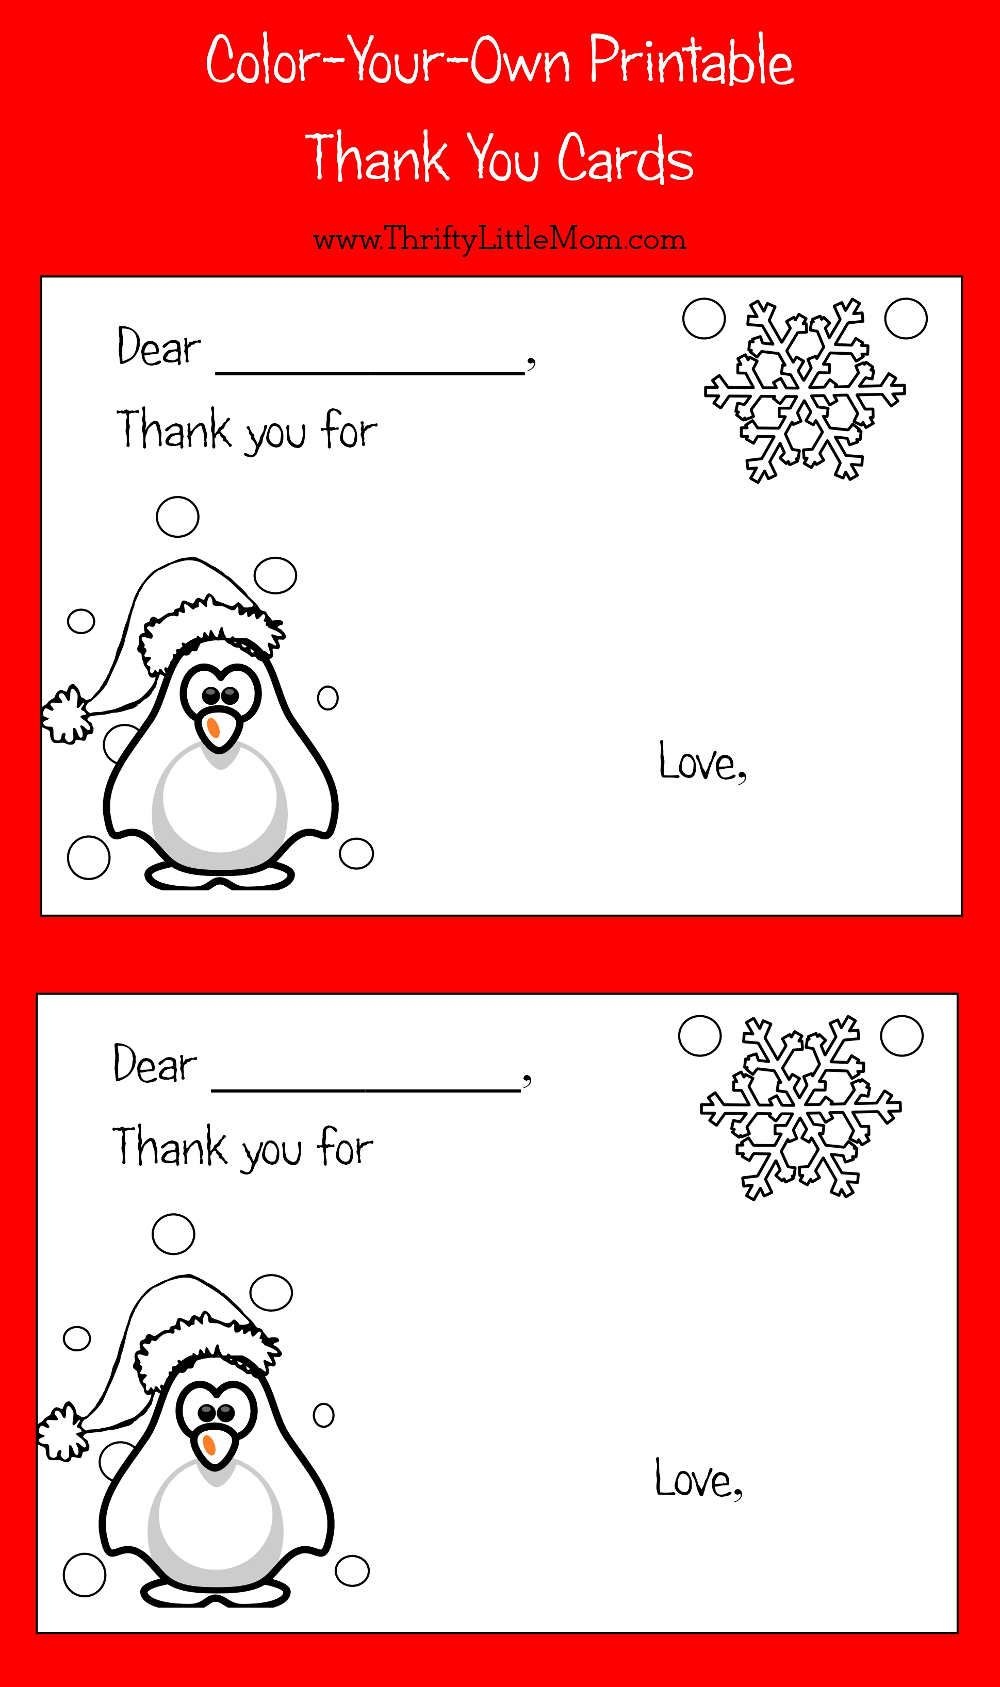 Color-Your-Own Printable Thank You Cards For Kids | Thrifty Thursday - Free Printable Color Your Own Cards